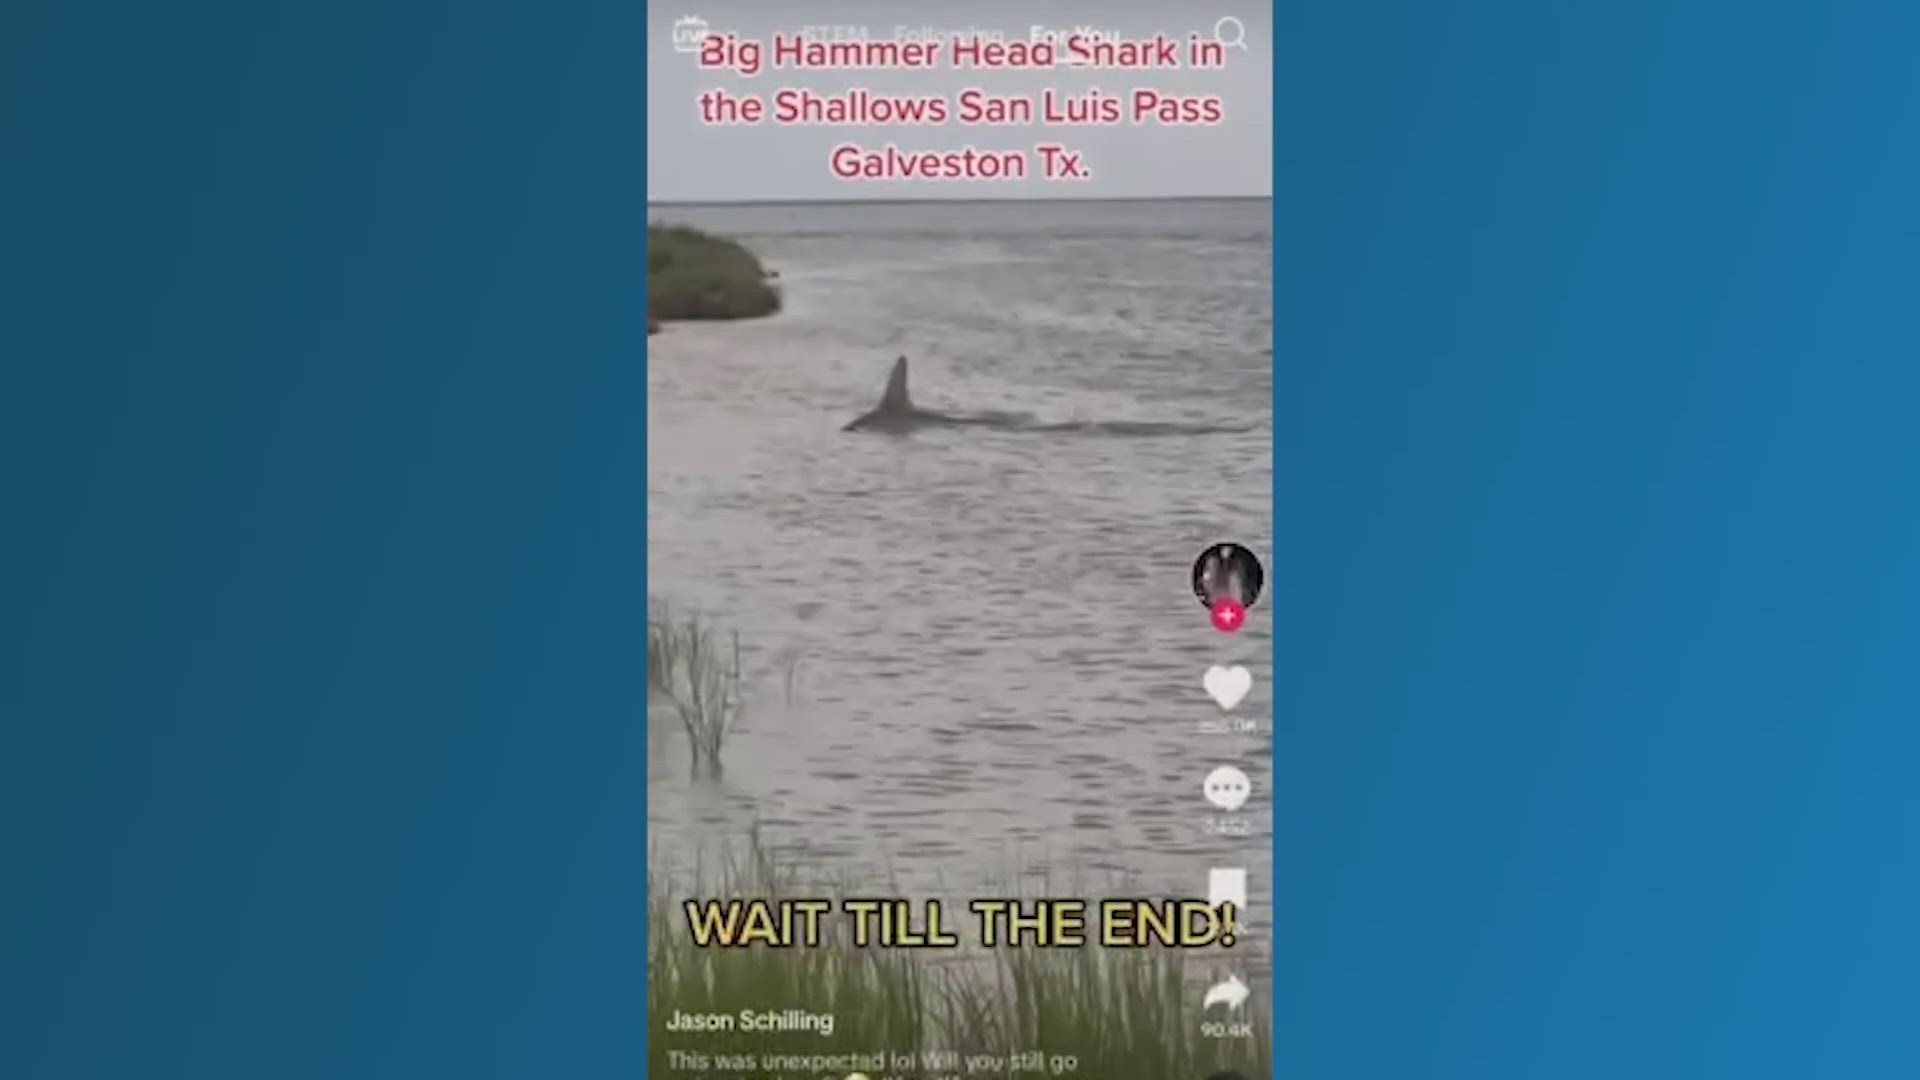 Beach visitors are on alert after a hammerhead shark, thought to be at least 11 feet long, was reportedly spotted in the San Luis pass this week.